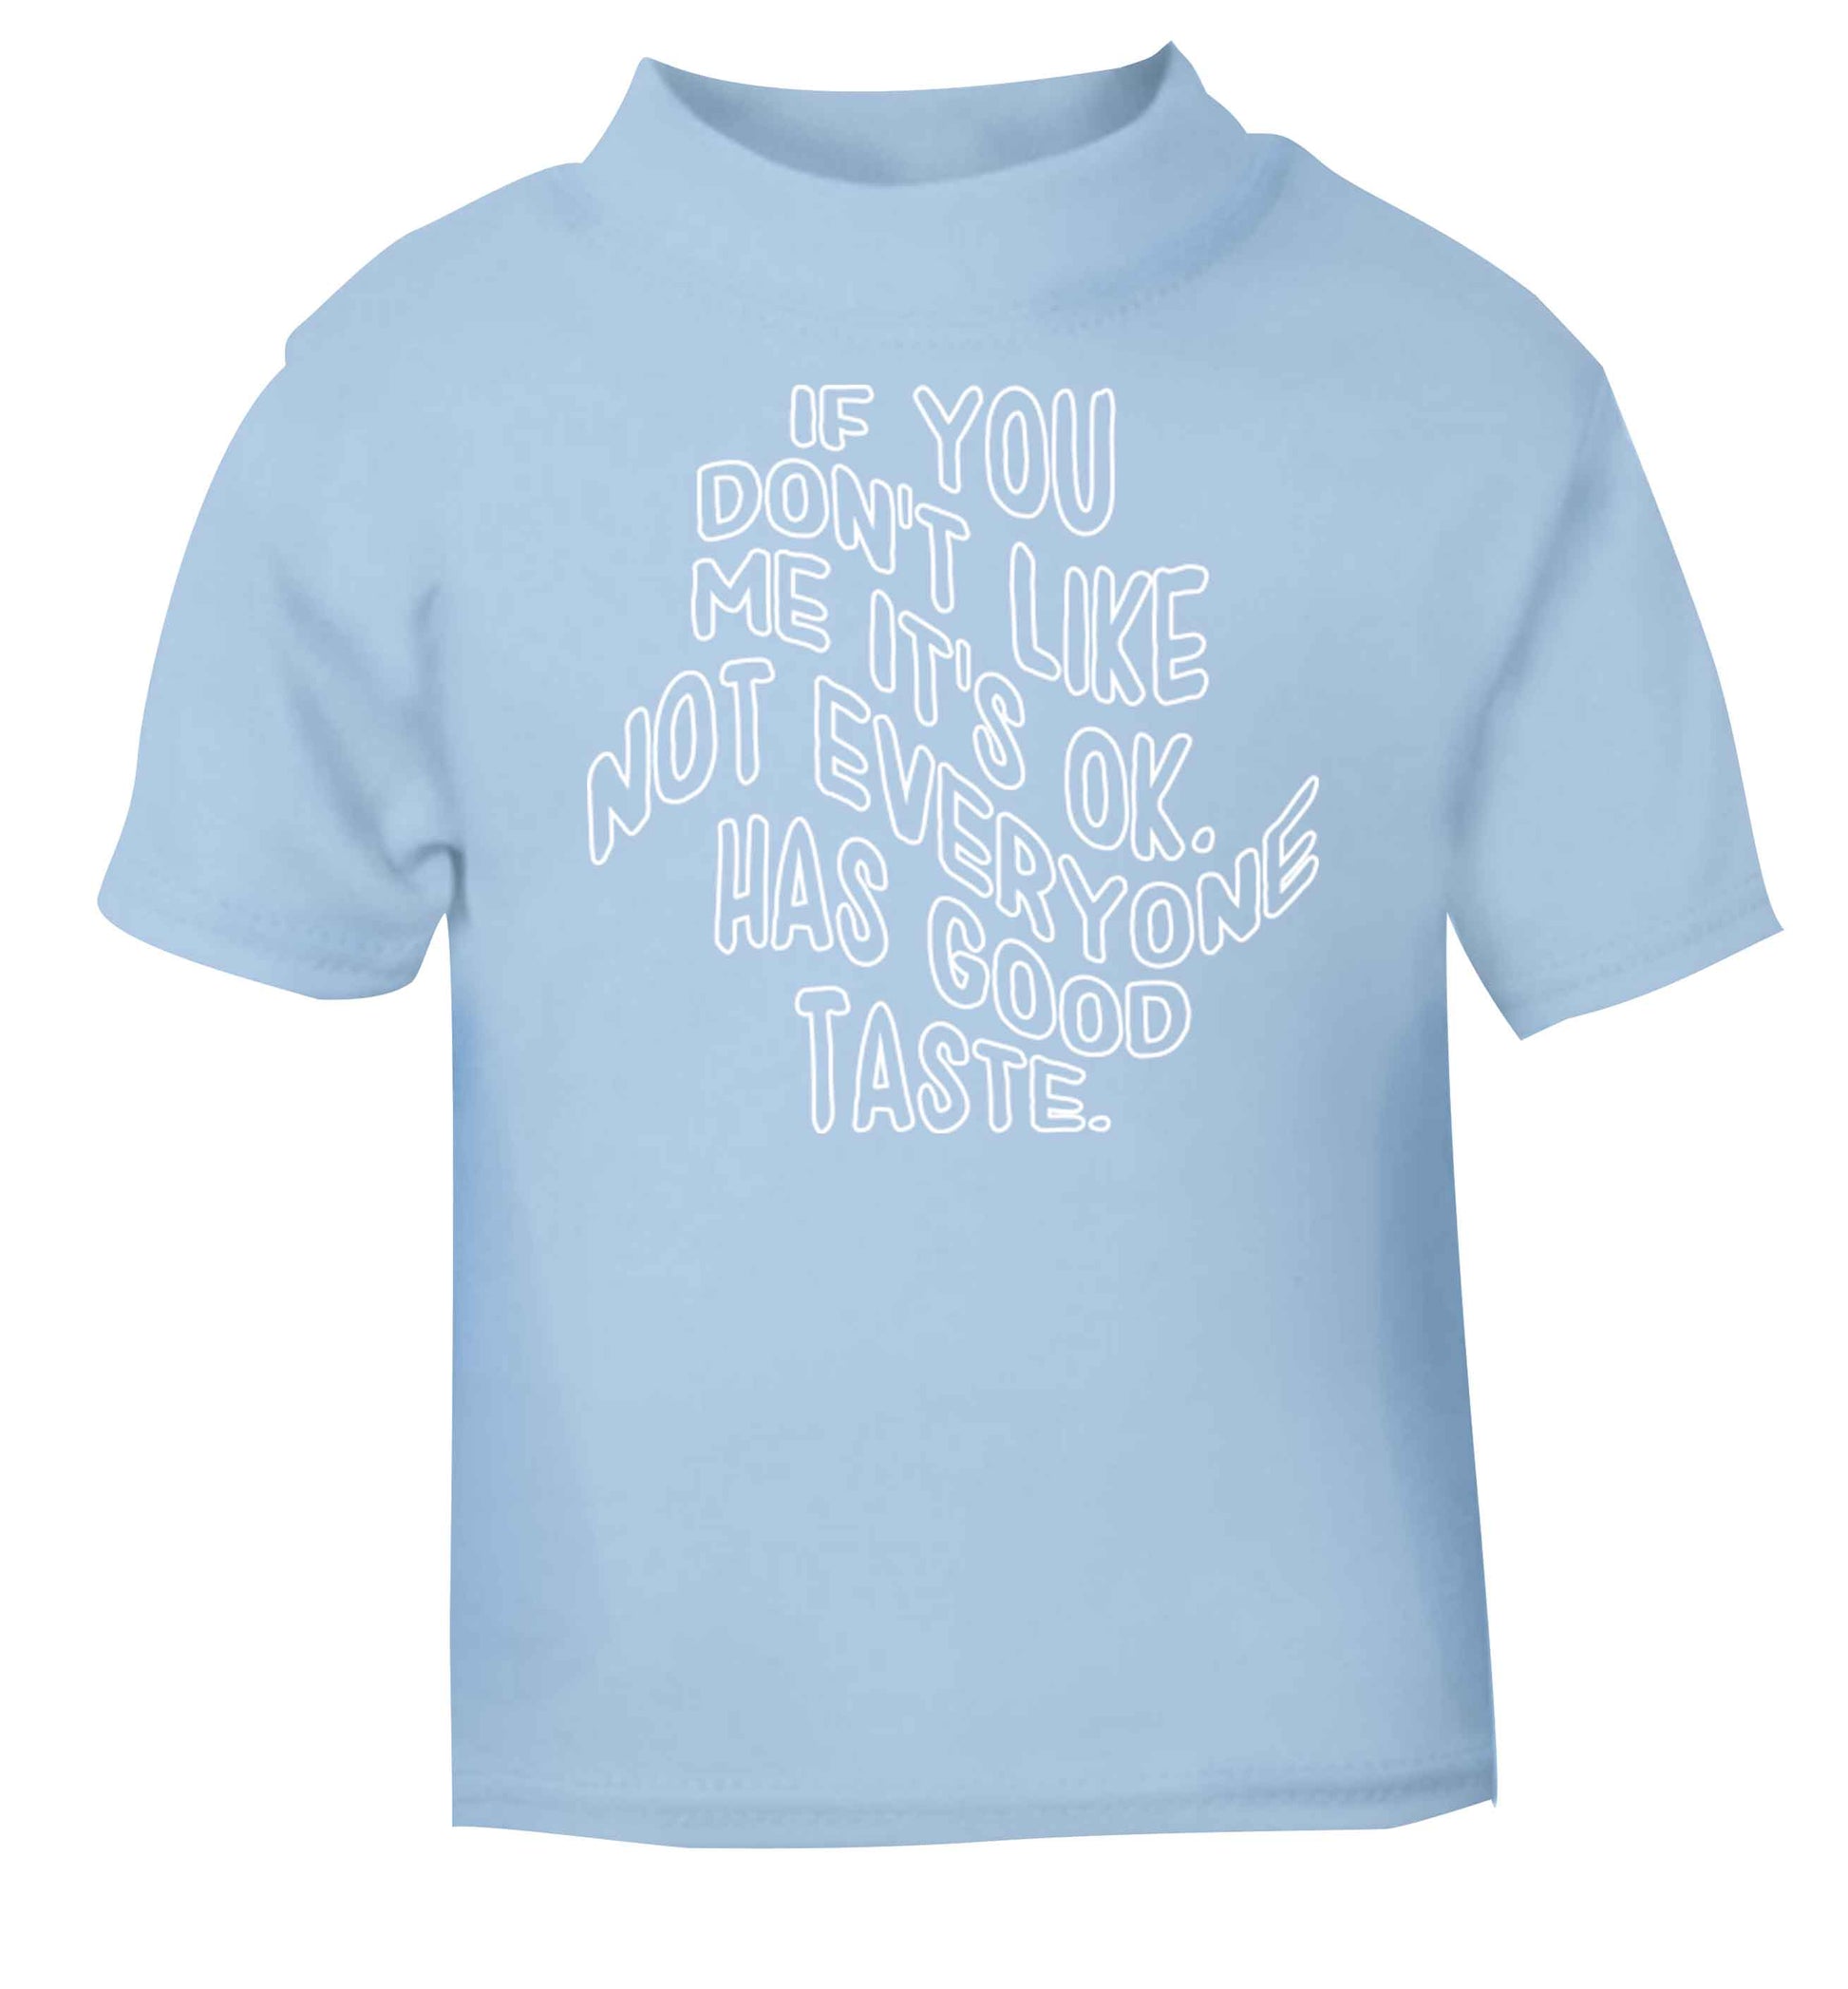 If you don't like me it's ok not everyone has good taste light blue baby toddler Tshirt 2 Years